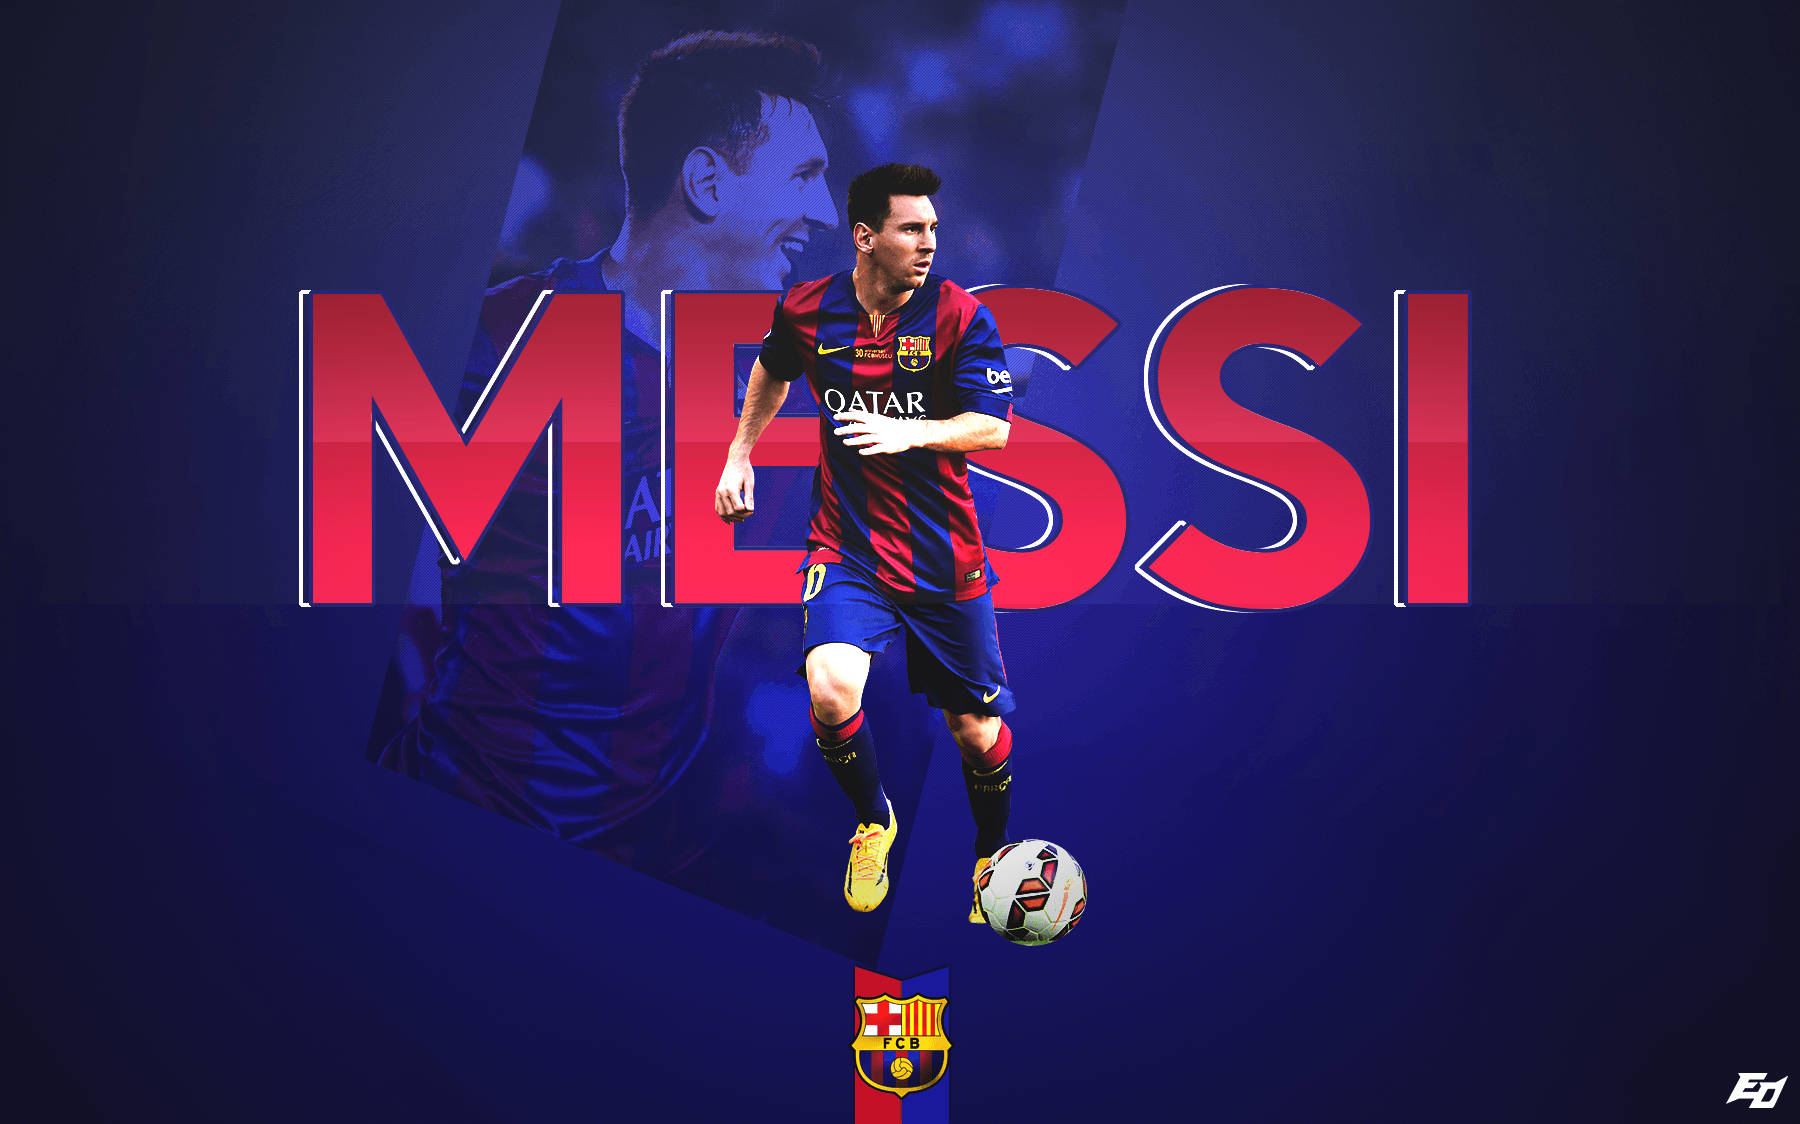 Download Messi Barcelona With Ball Blue Background Wallpaper | Wallpapers .com